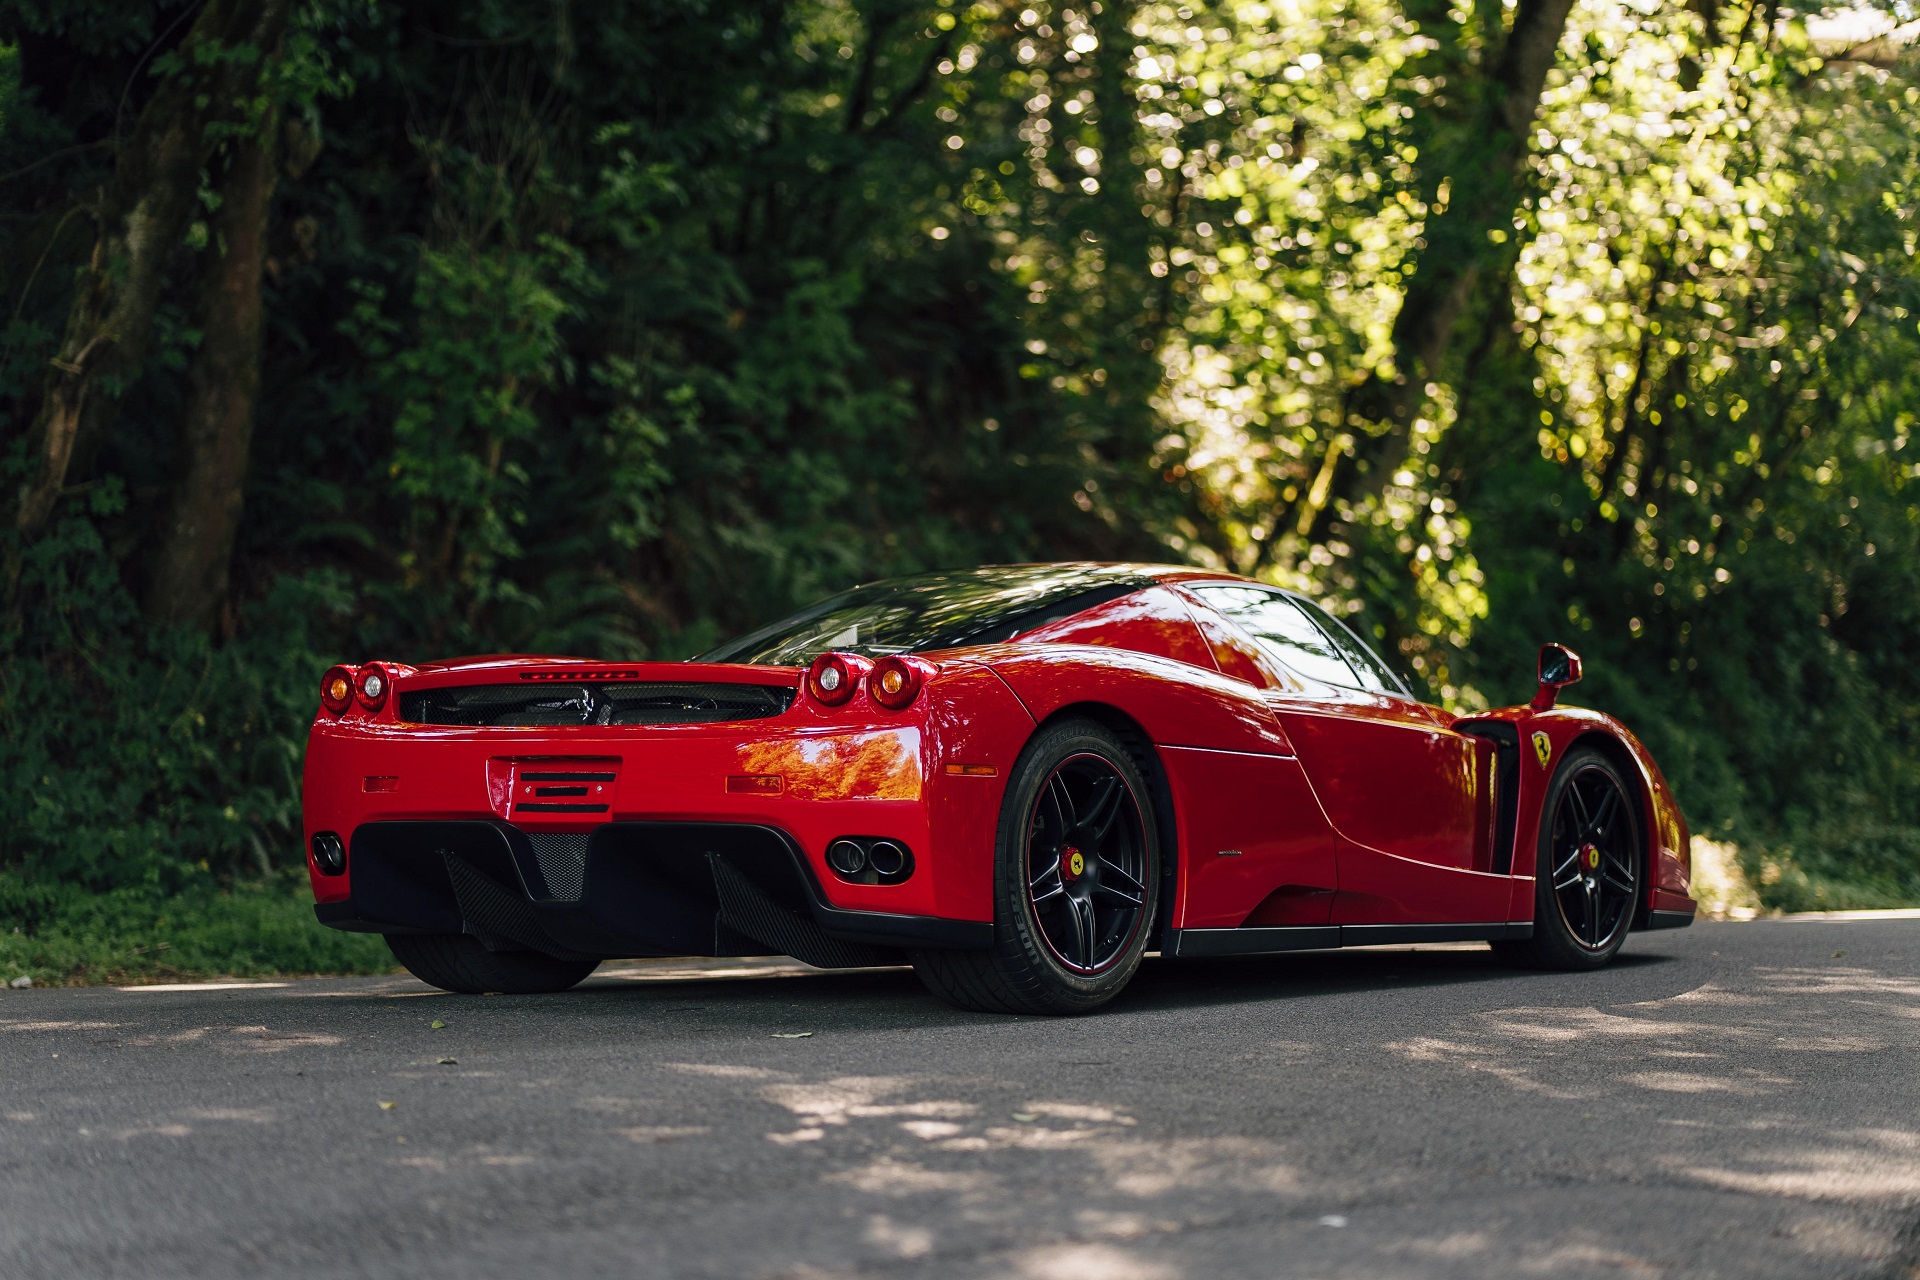 rear-angled view of the red 2003 Ferrari Enzo